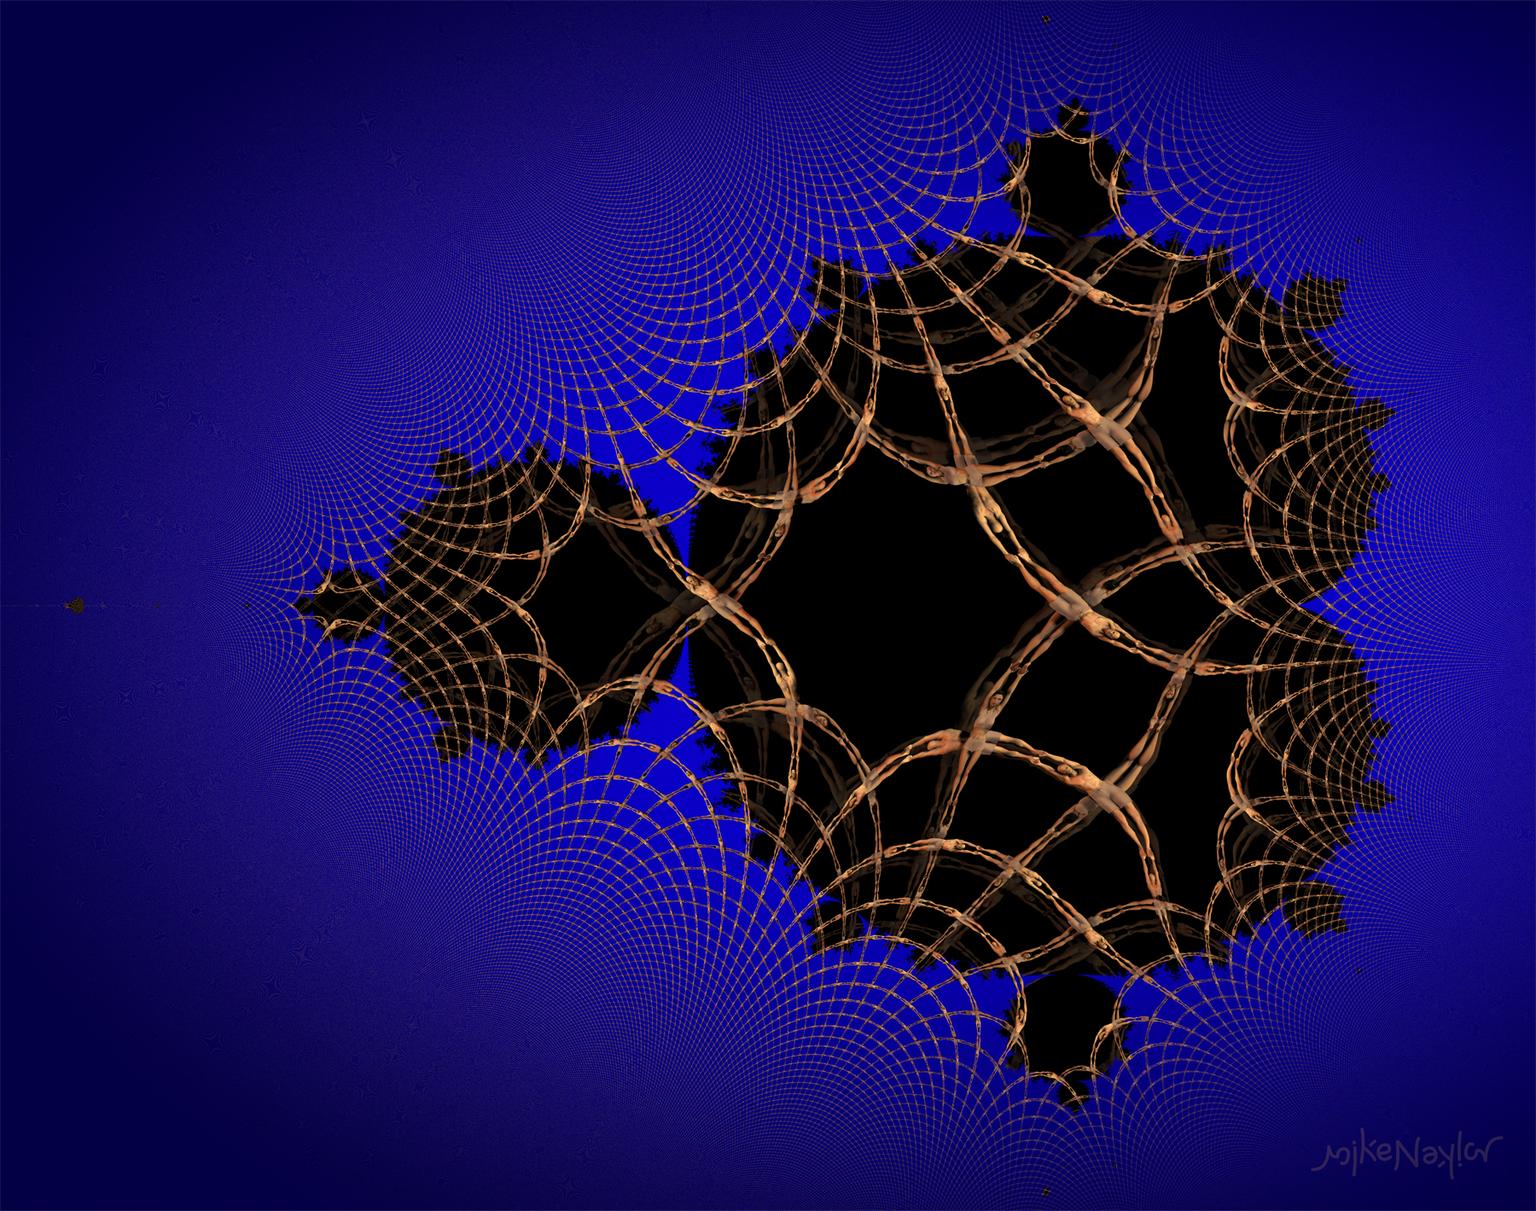 Image for entry 'The Human Web'